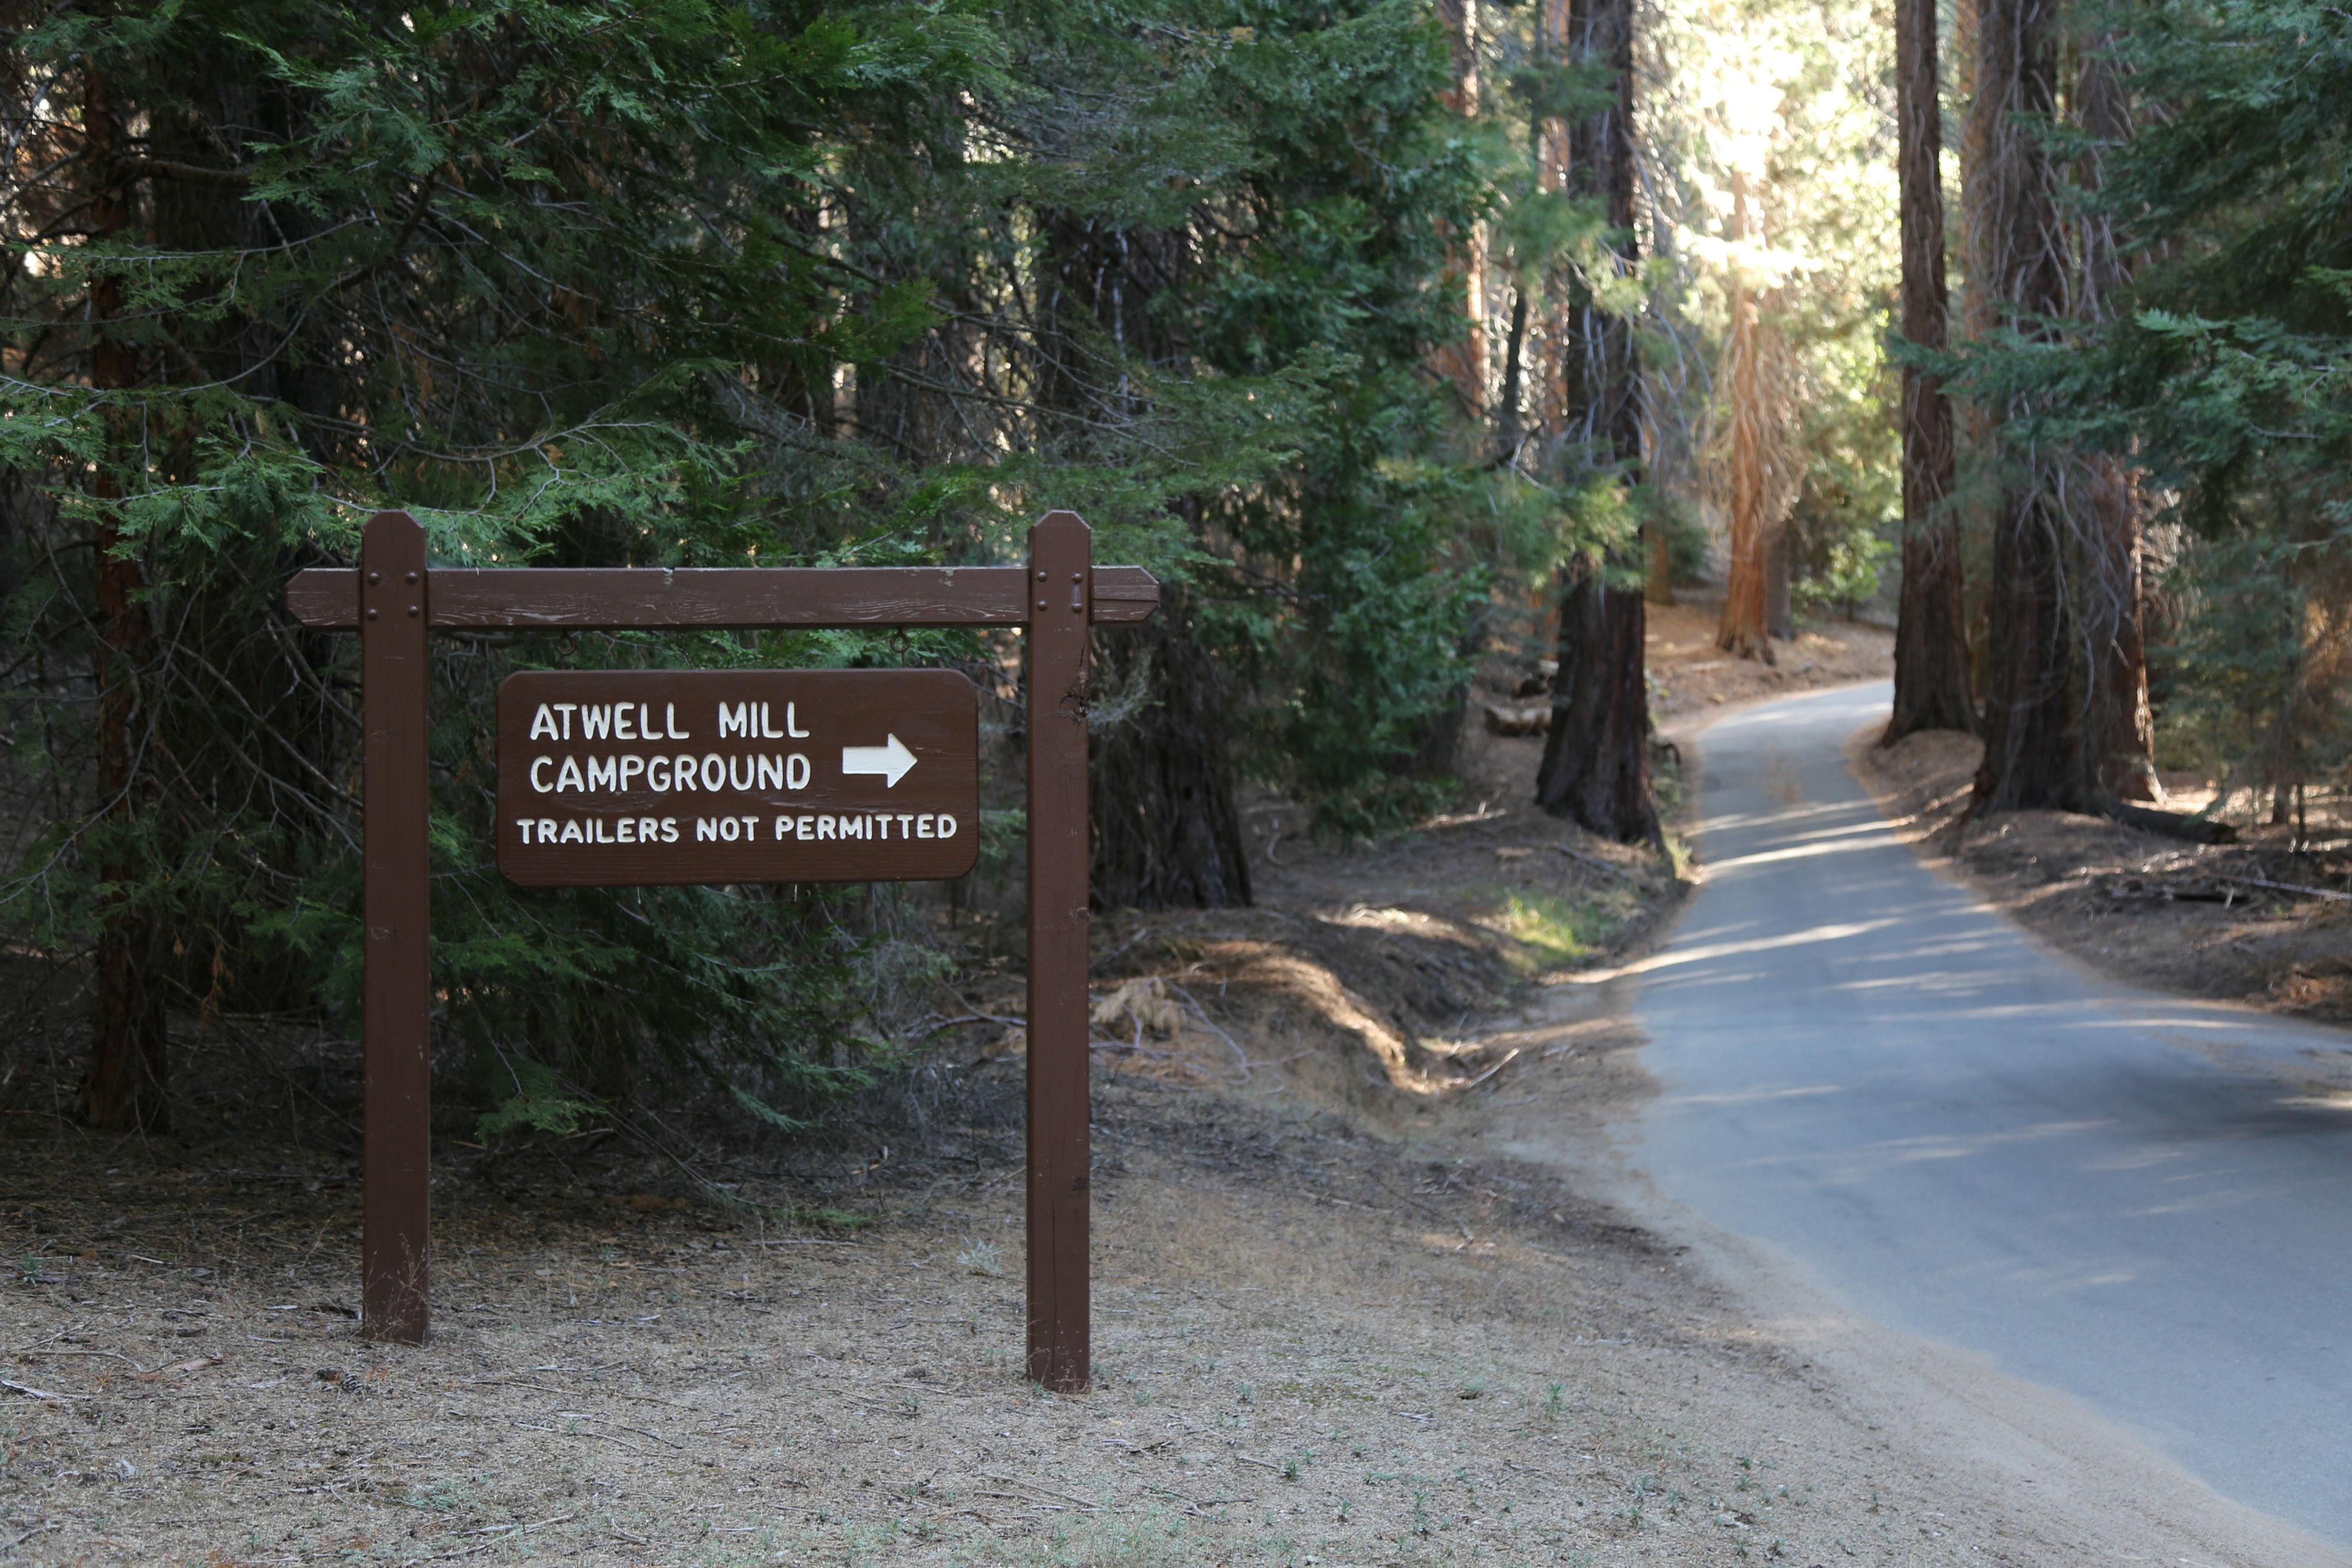 A sign reads "Atwell Mill Campground" near a narrow road